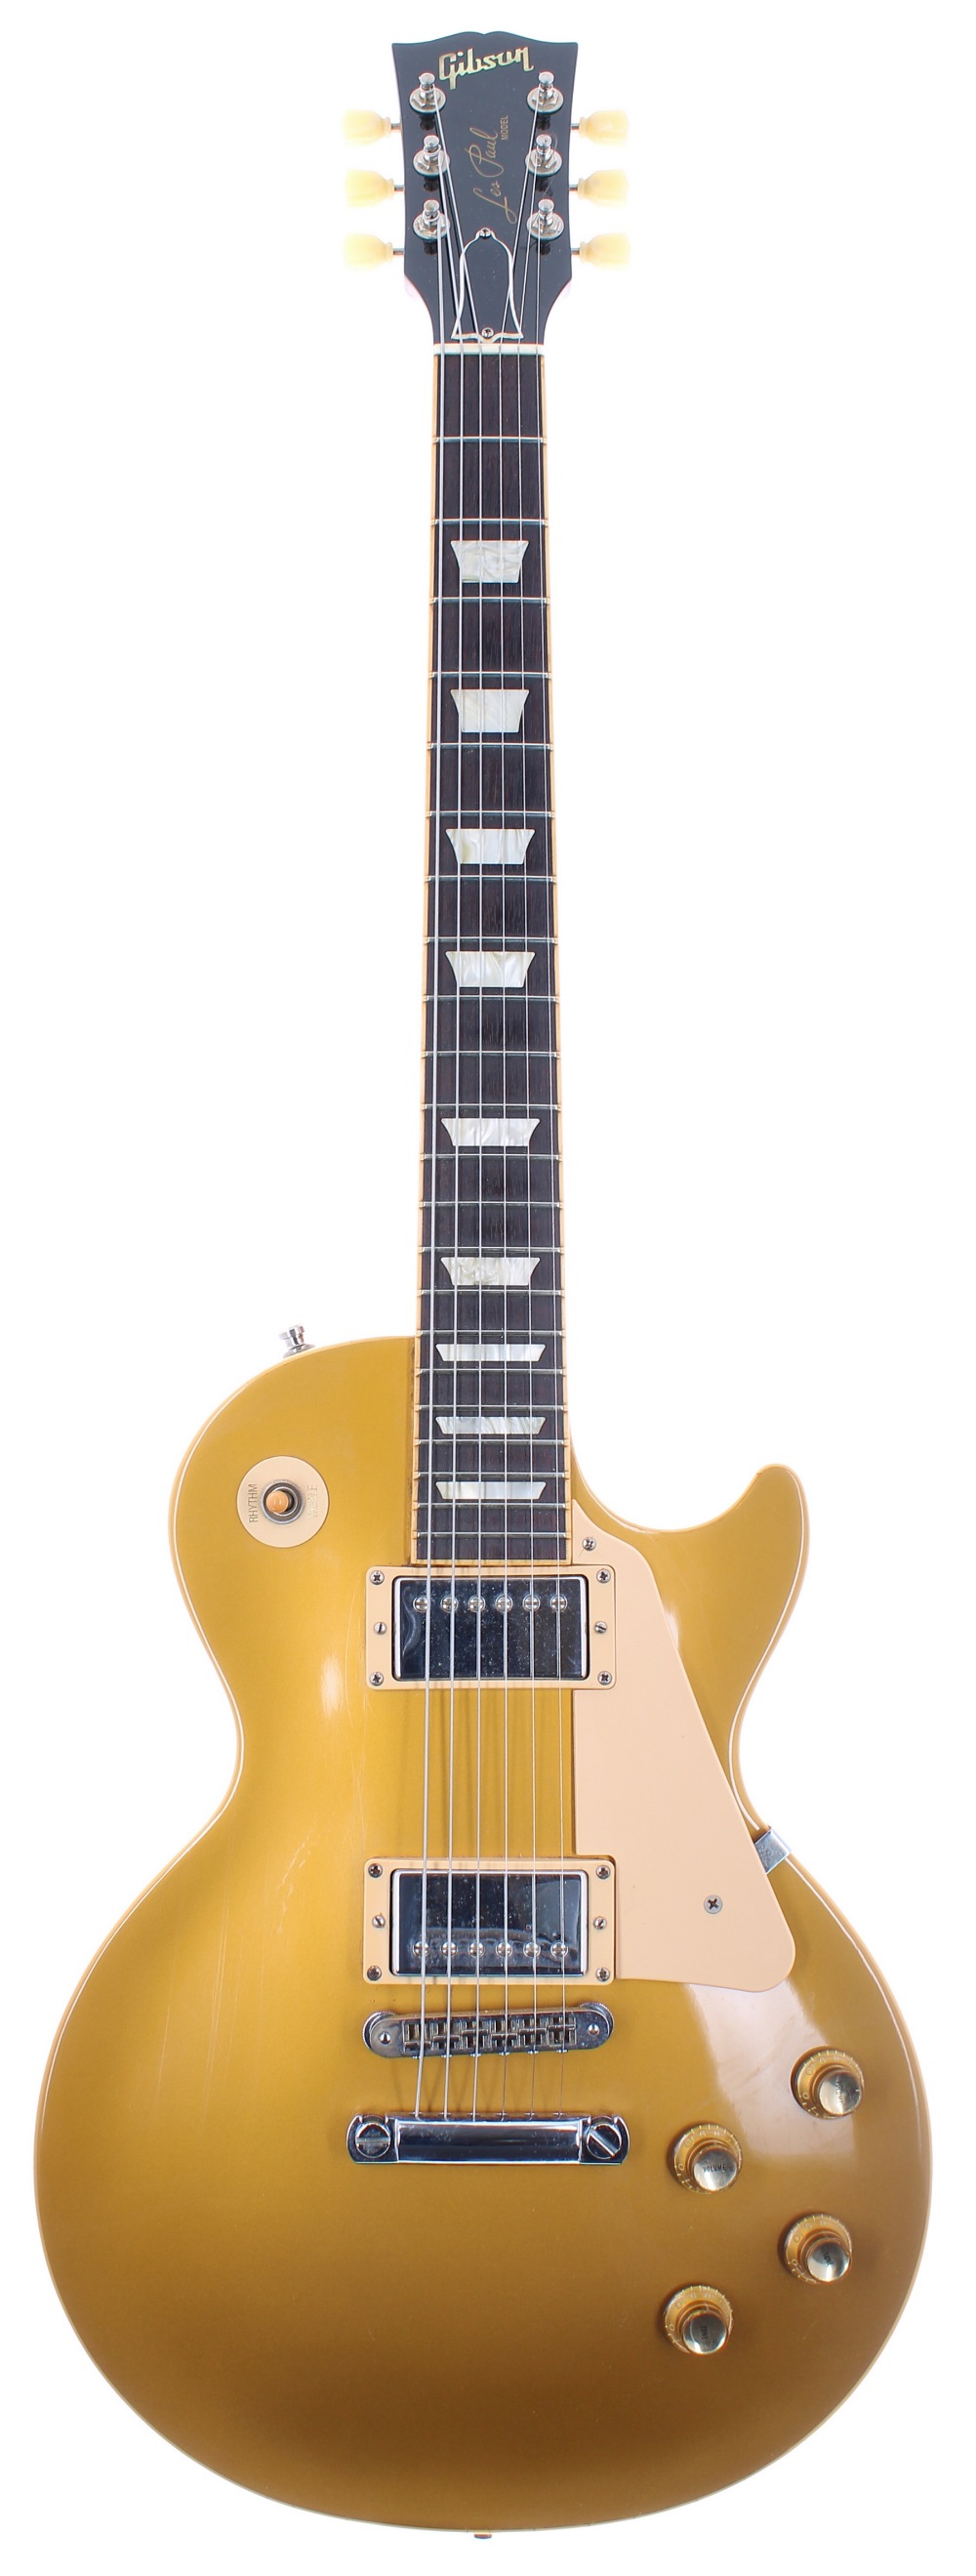 2009 Gibson Les Paul Gold Top electric guitar, made in USA, ser. no. 0xx9xxx9; Finish: gold;